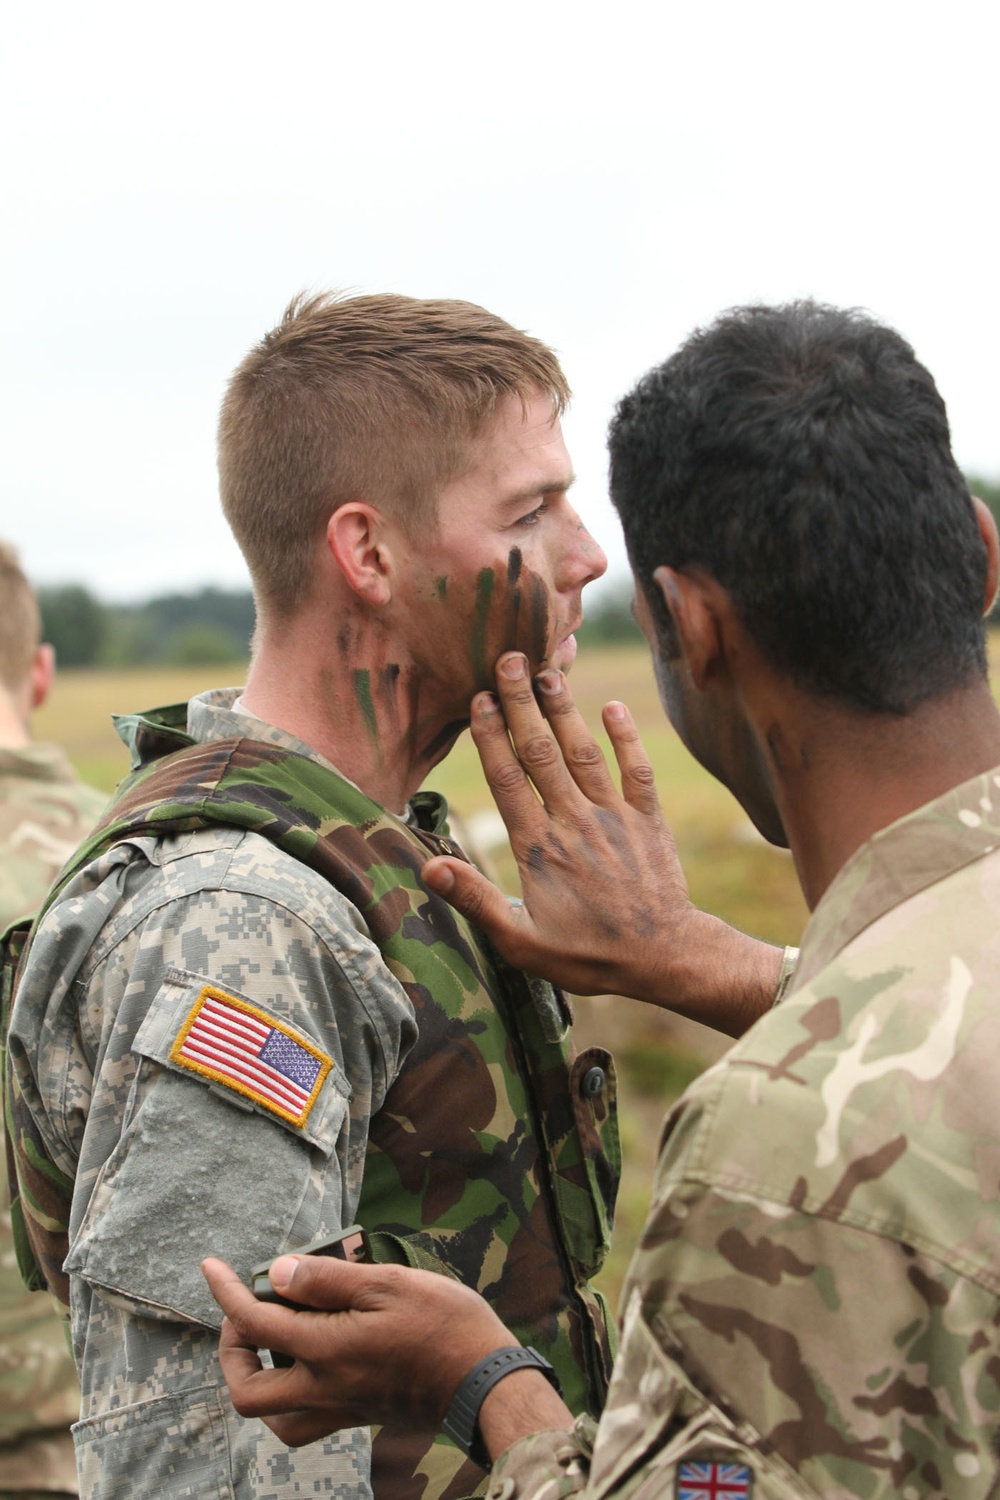 Royal Military Academy Sandhurst and West Point cadets train together at US Army's 7th Army Joint Multinational Command at Grafenwoehr Training Area